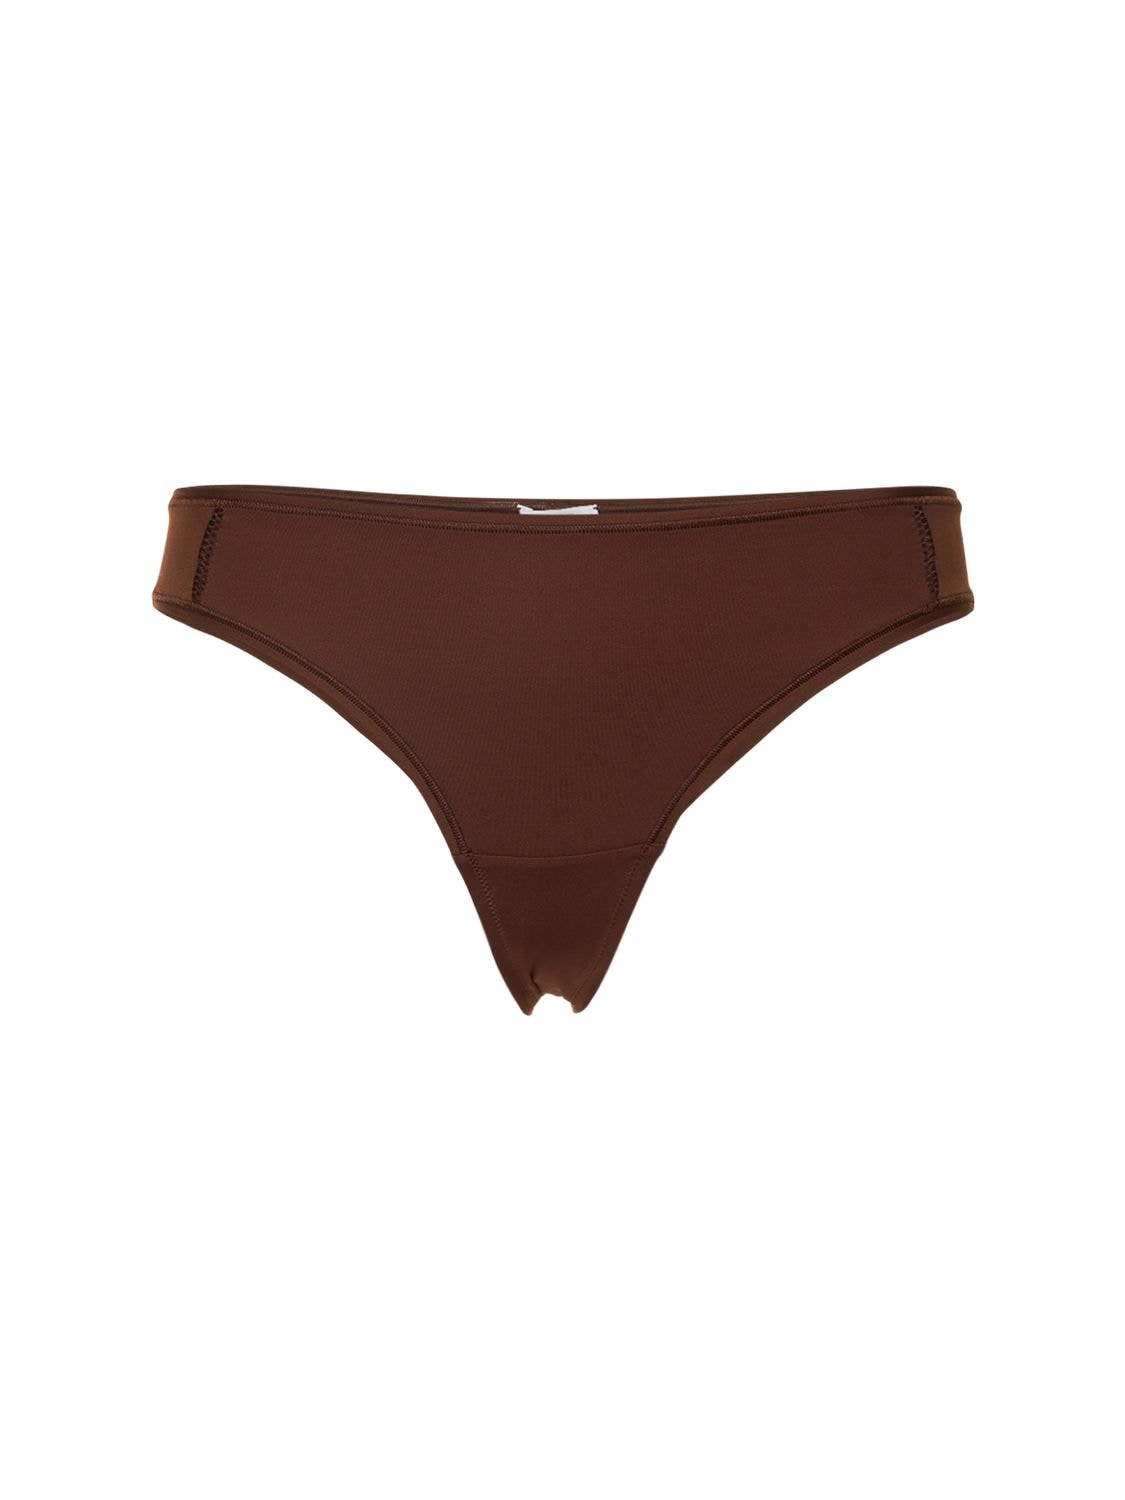 Eres Synthetic Brown Mika Thong Womens Clothing Lingerie Knickers and underwear 